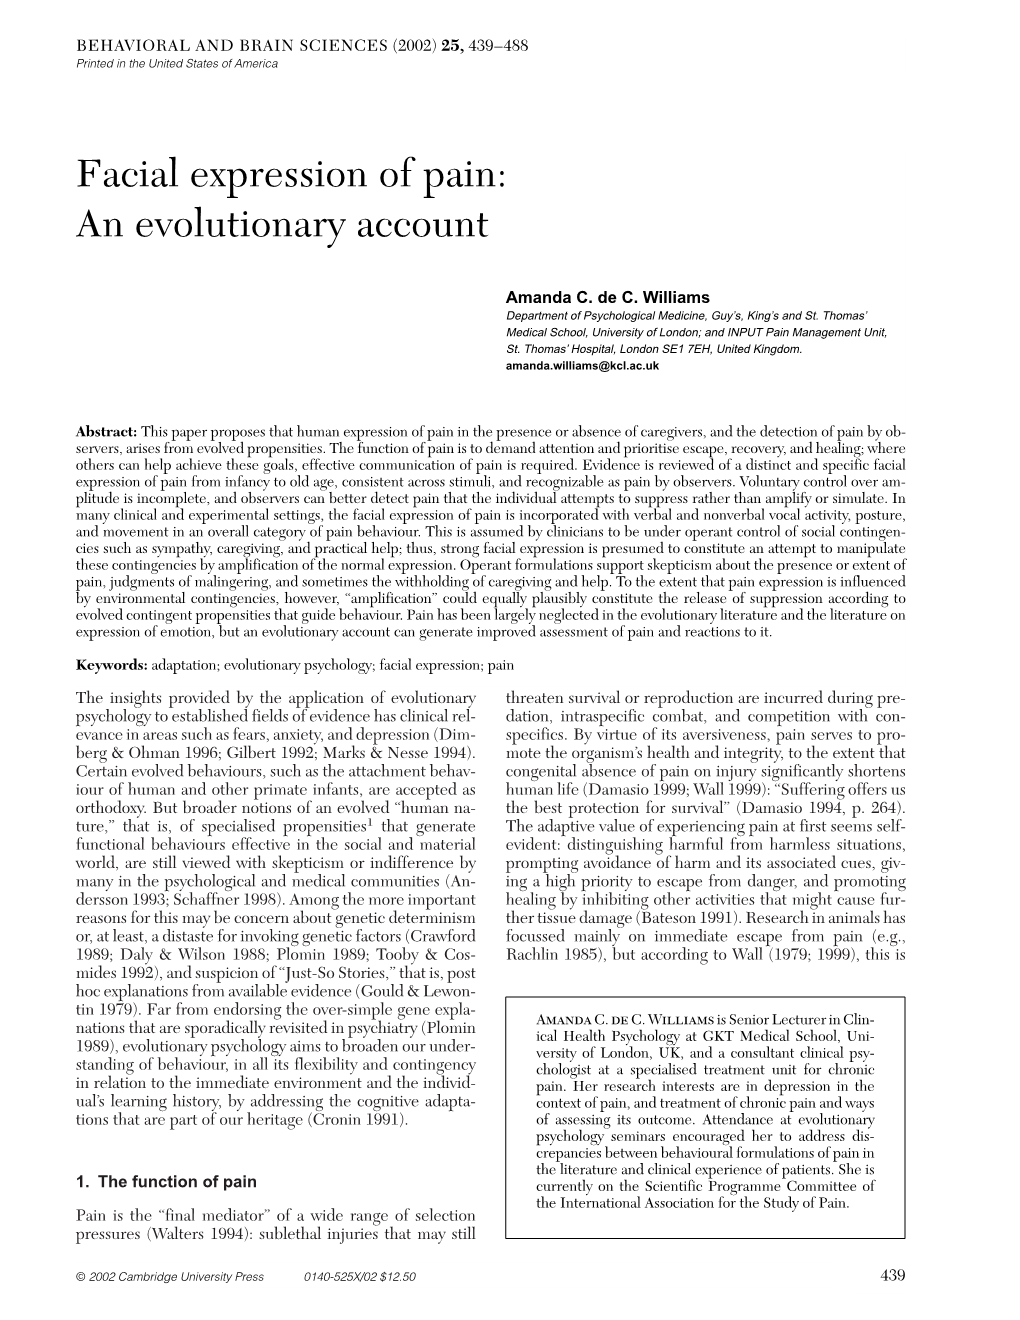 Facial Expression of Pain: an Evolutionary Account